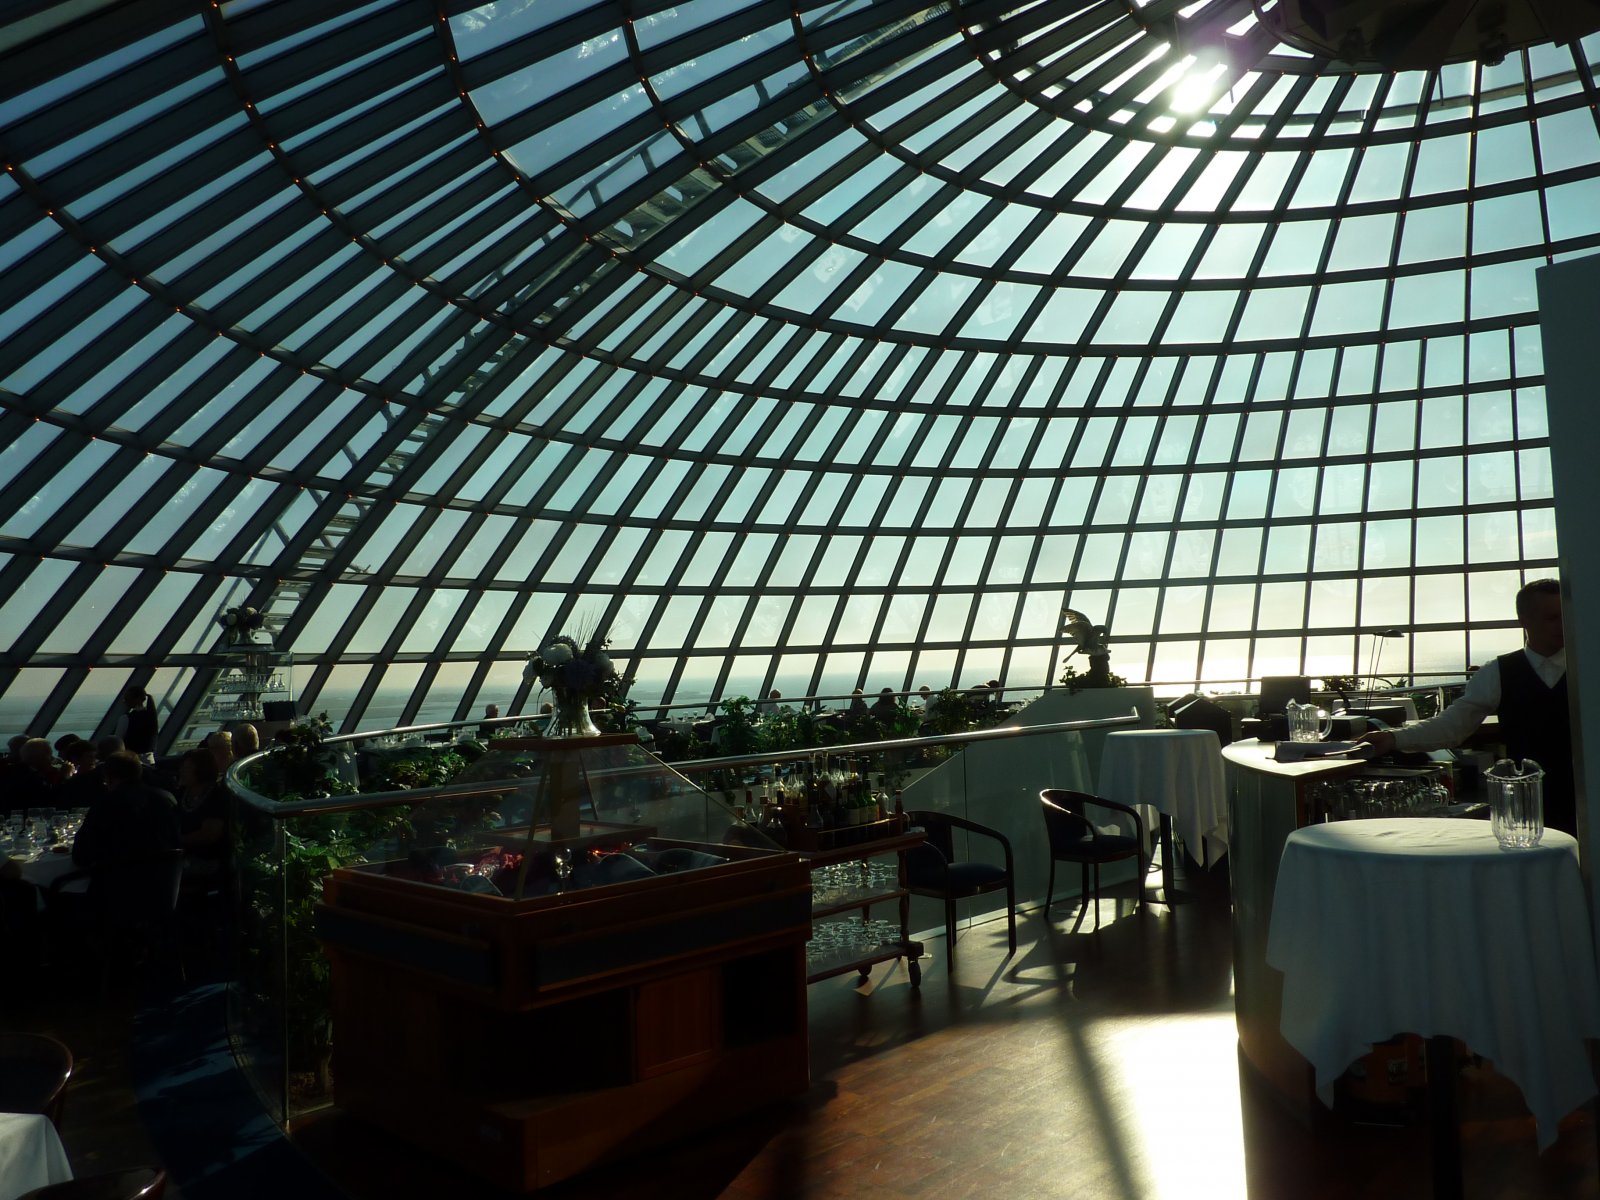 How to have dinner in a restaurant under the dome in Reykjavik